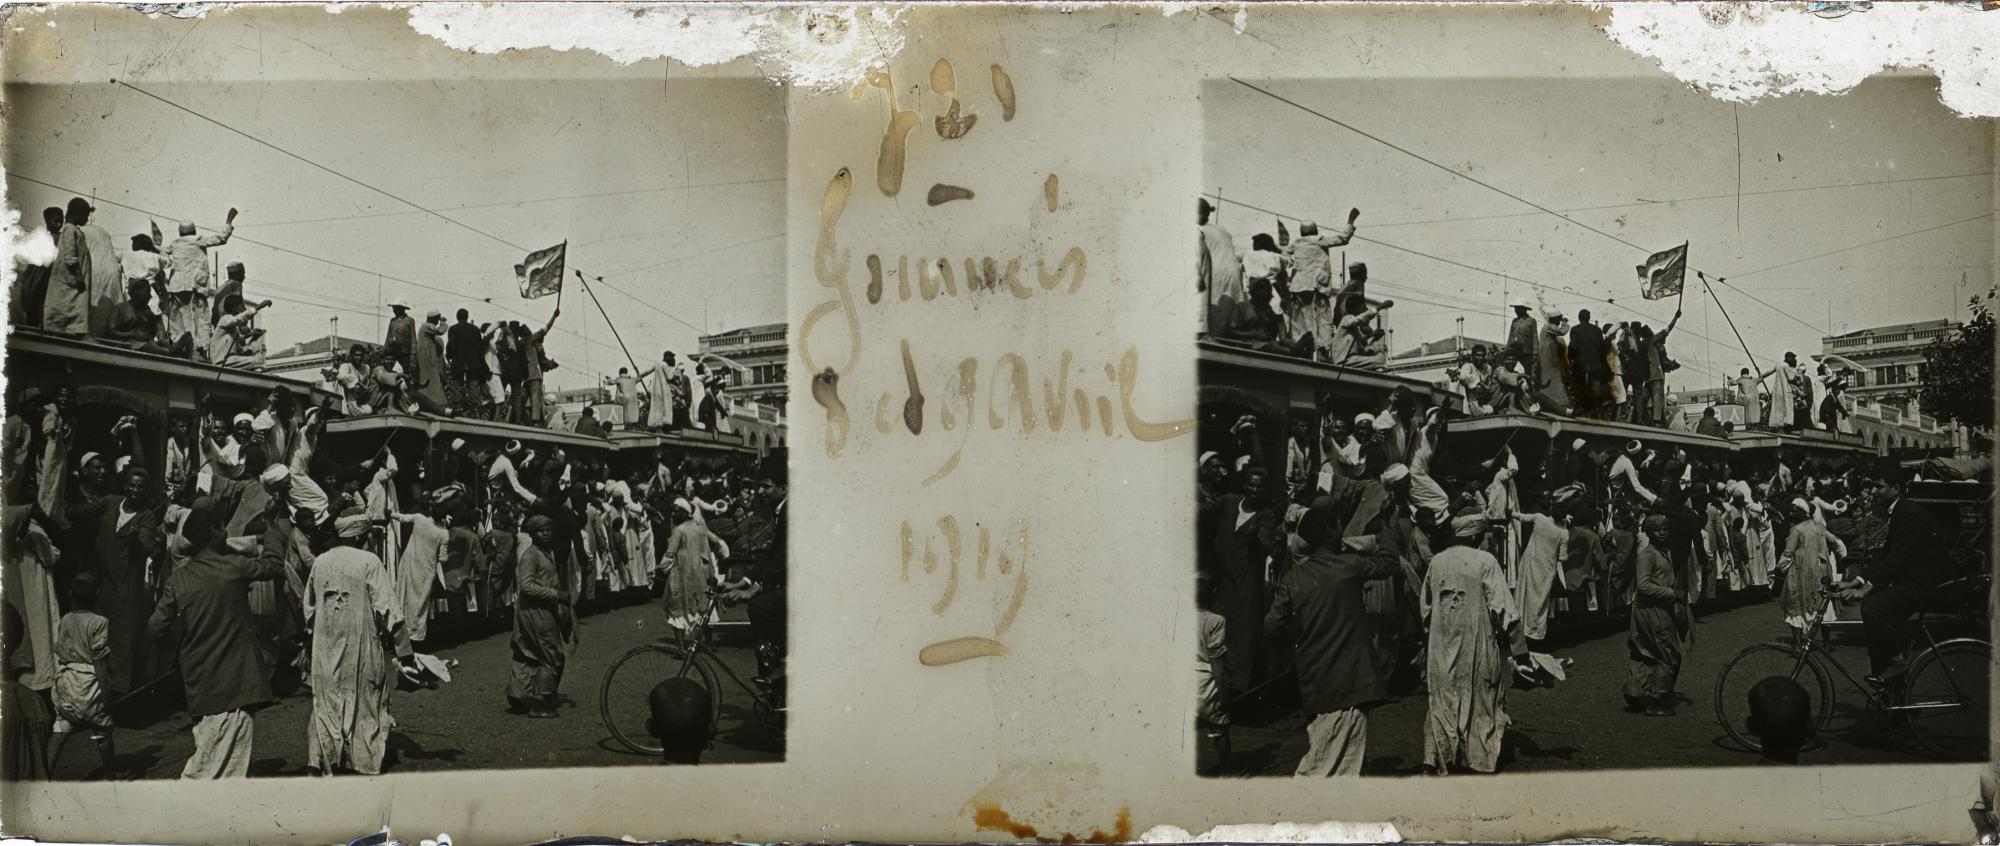 Egypt’s 1919 revolution, April 8-9, from Taxiphote digitization project. Photo courtesy of Rare Books and Special Collections Library.